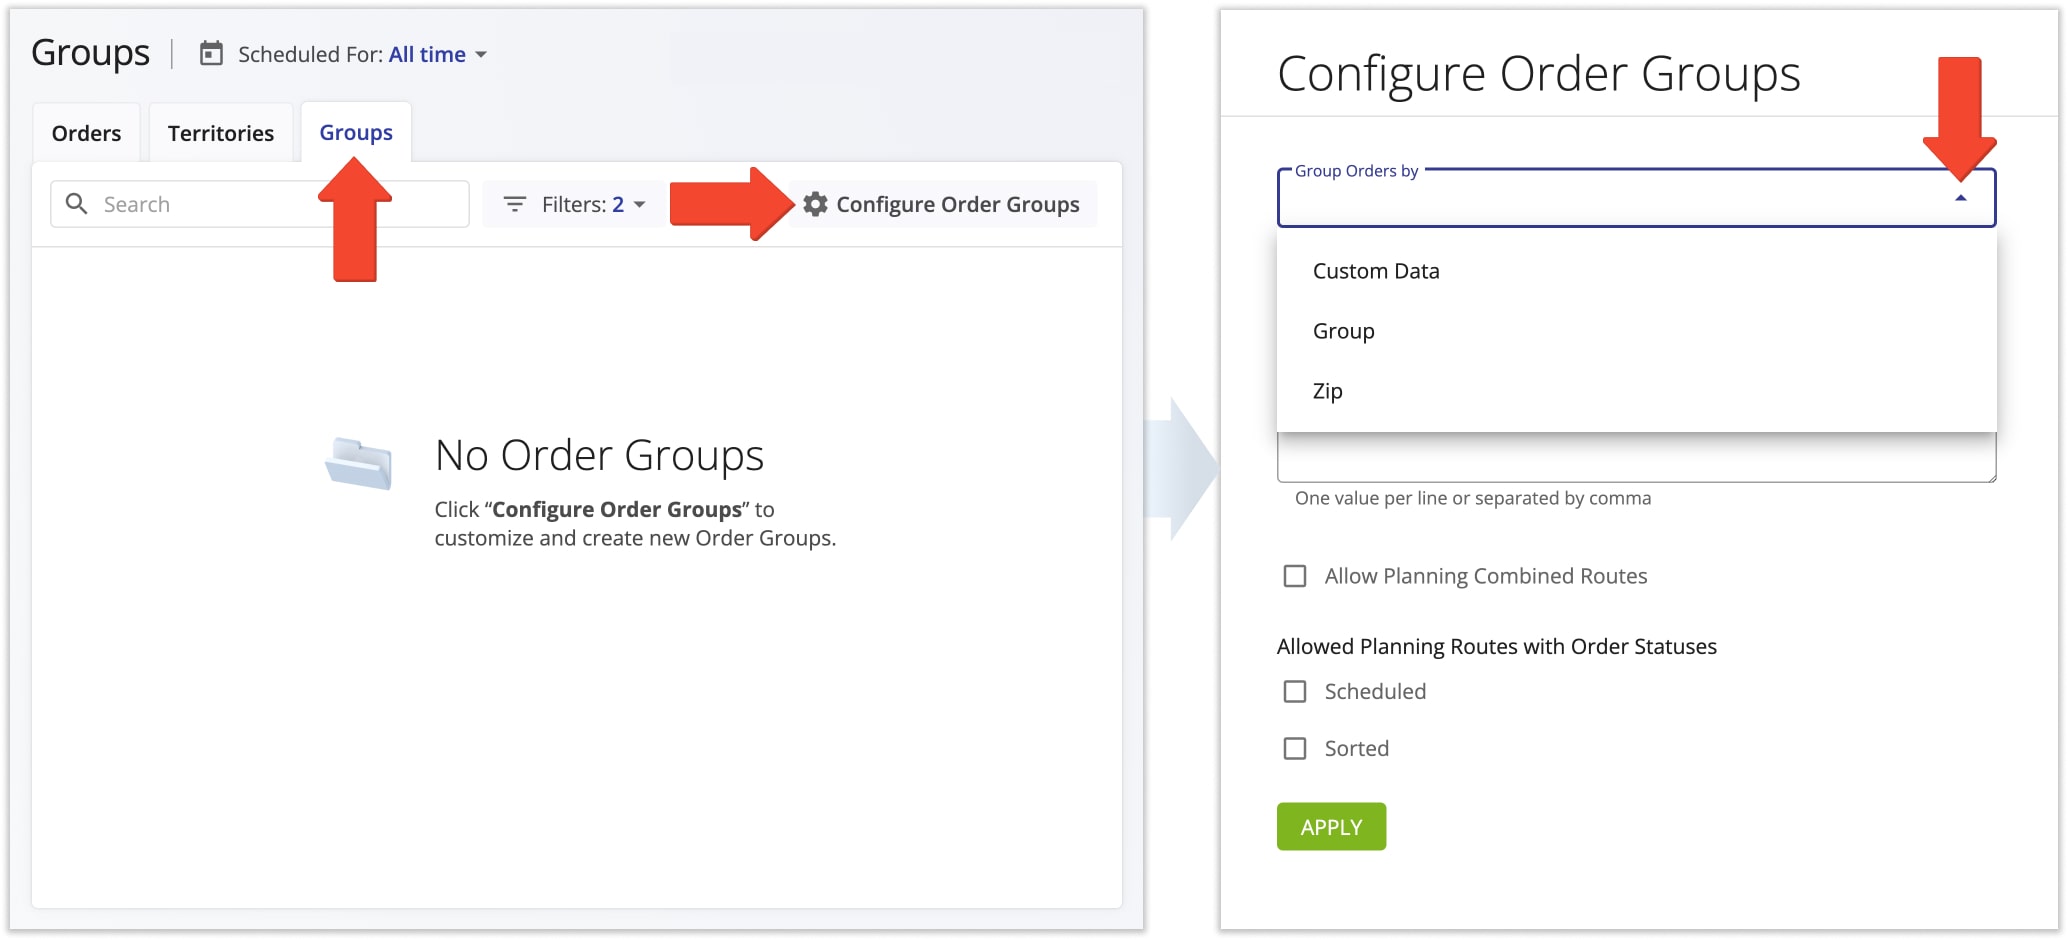 Configure Order Groups to group orders by ZIP Code, Custom Data values, and unique Group IDs and plan routes with custom Order Groups.